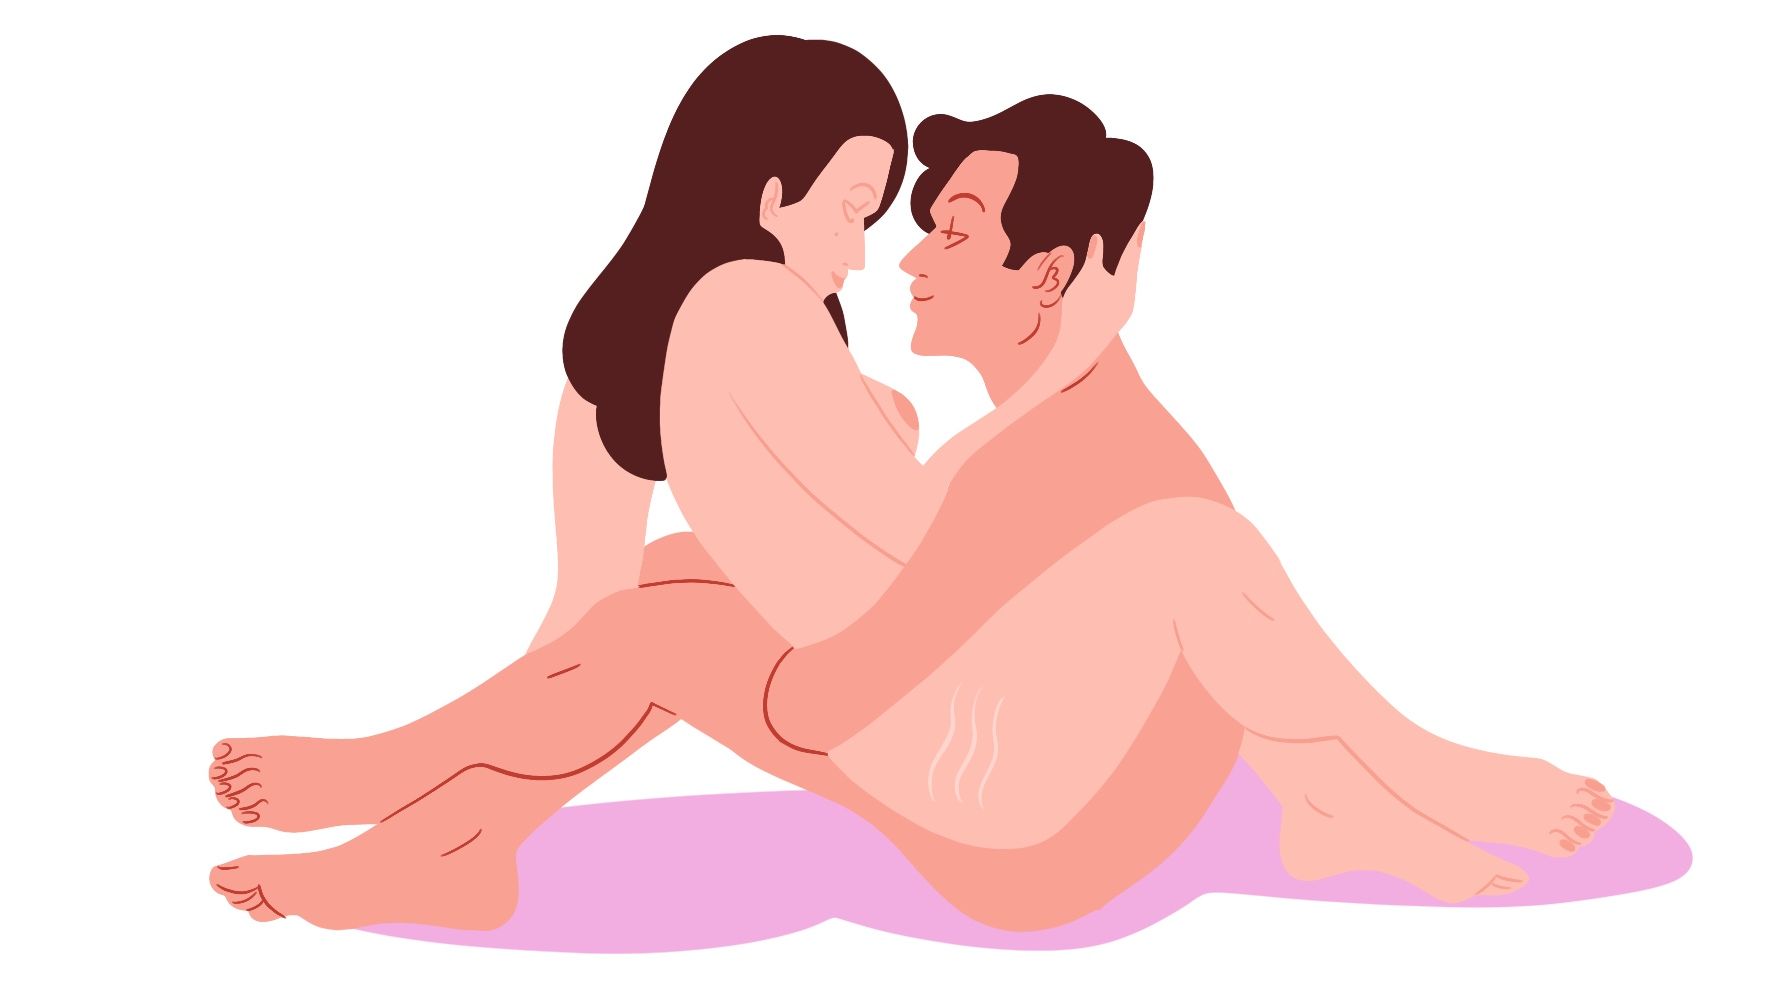 Romantic Before Sleep Sex - Lotus Sex Position: How to Do It and Why It's So Good